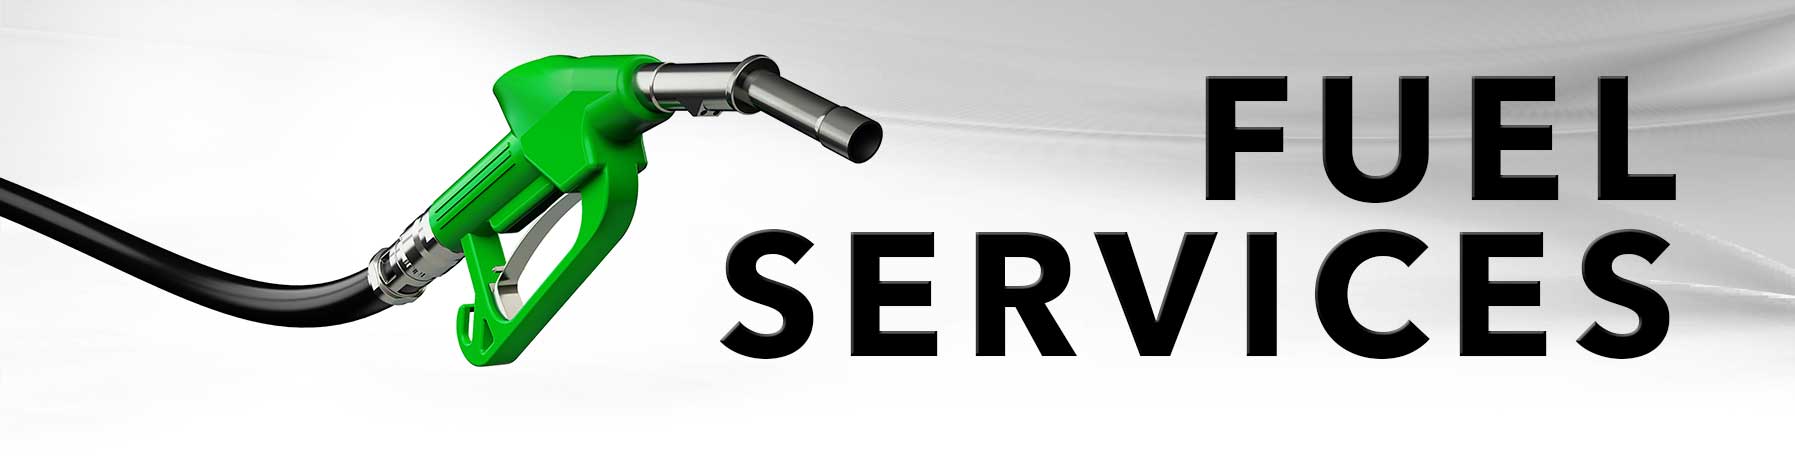 we provide fuel services